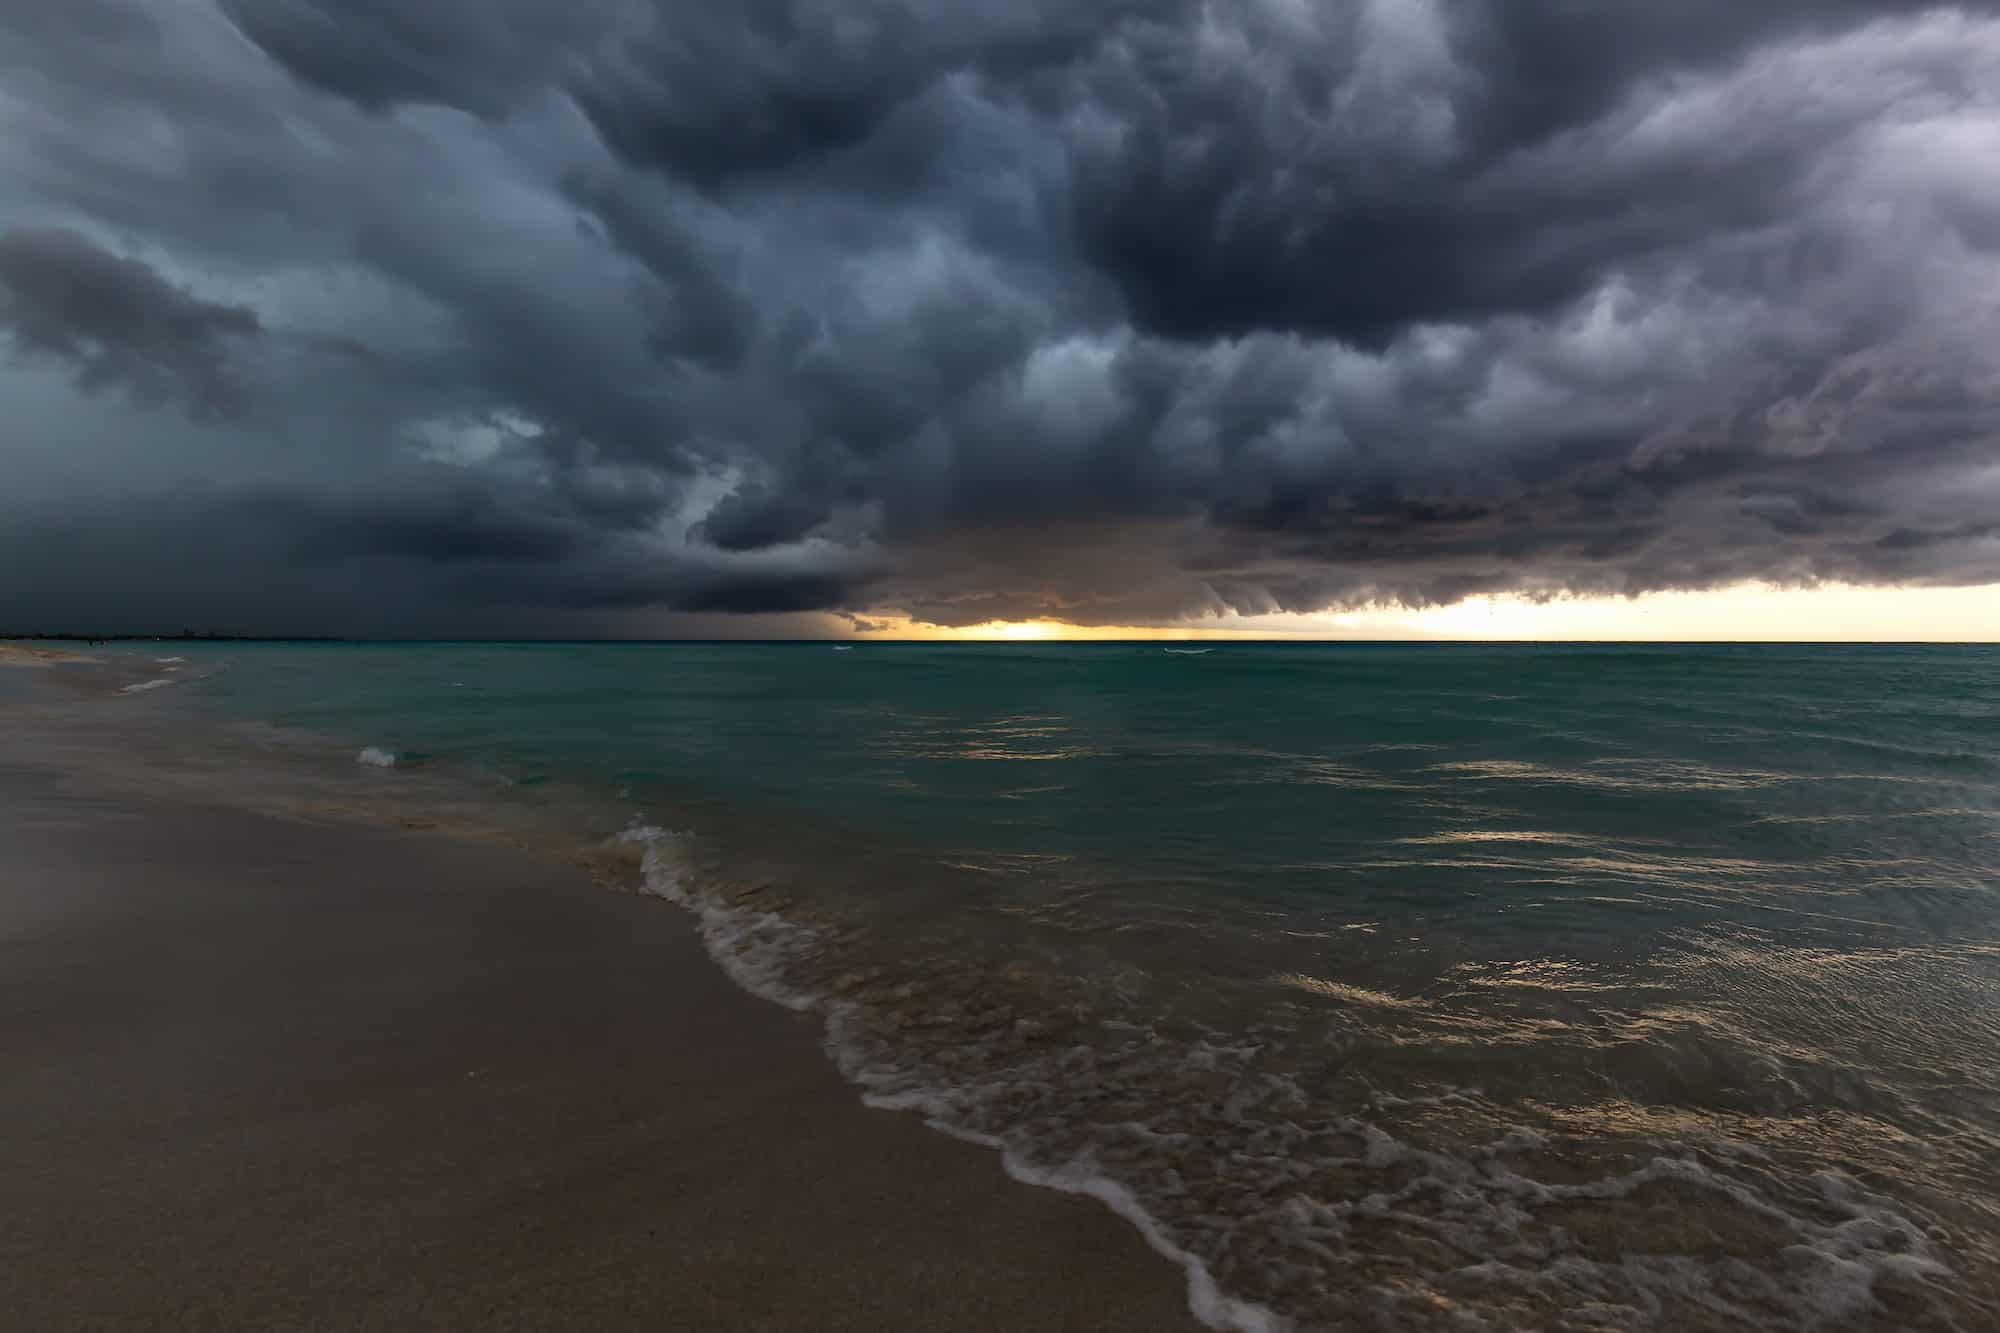 View of a sandy beach in Varadero, Cuba during Storm Weather